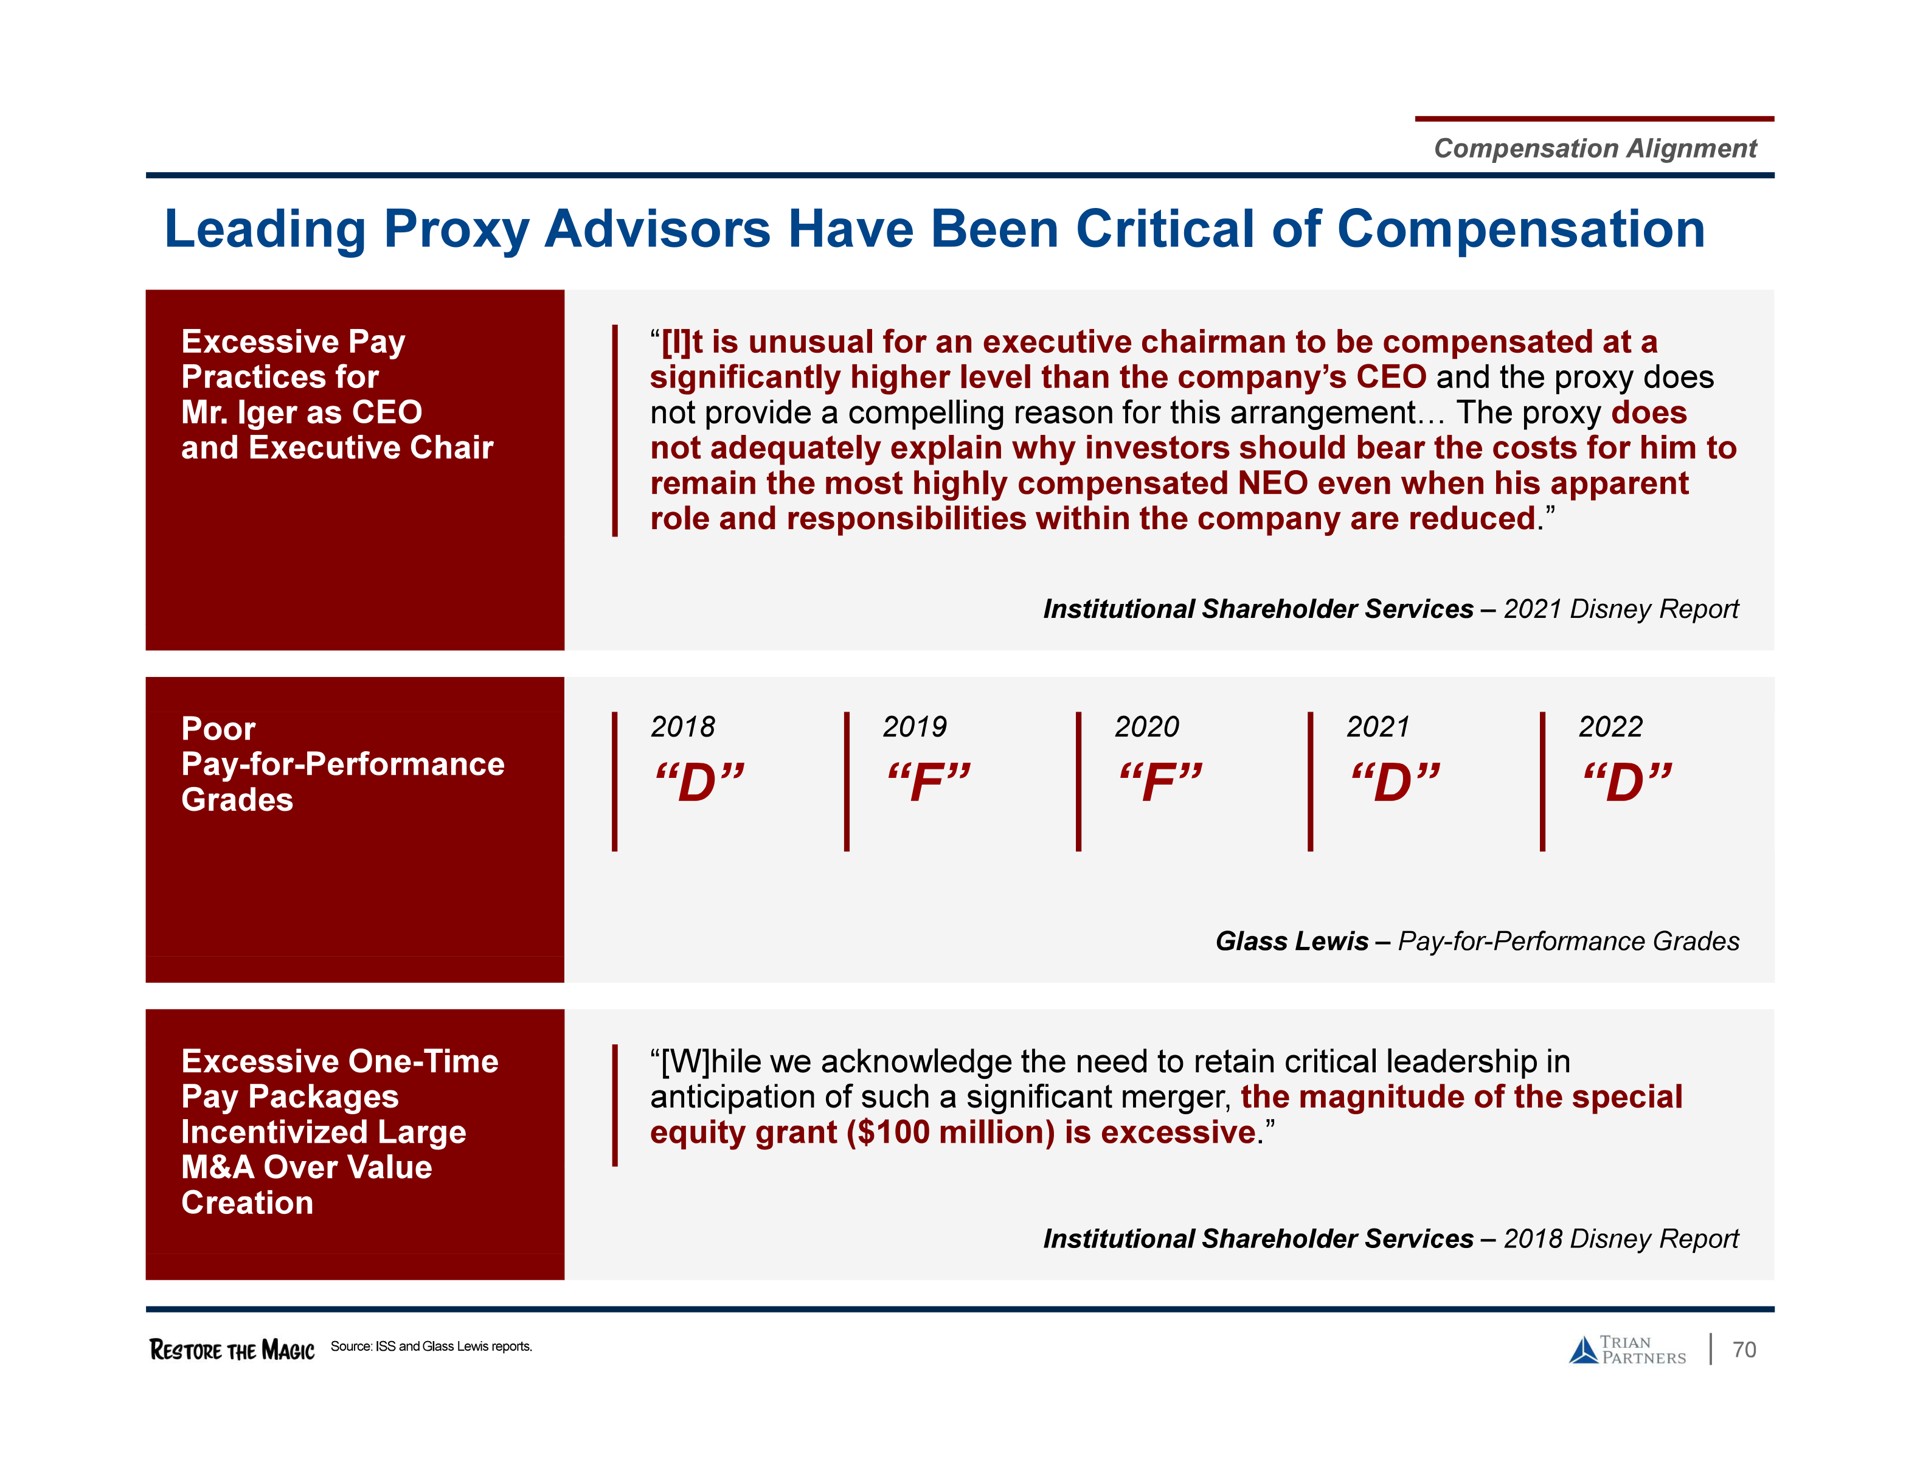 leading proxy advisors have been critical of compensation | Trian Partners